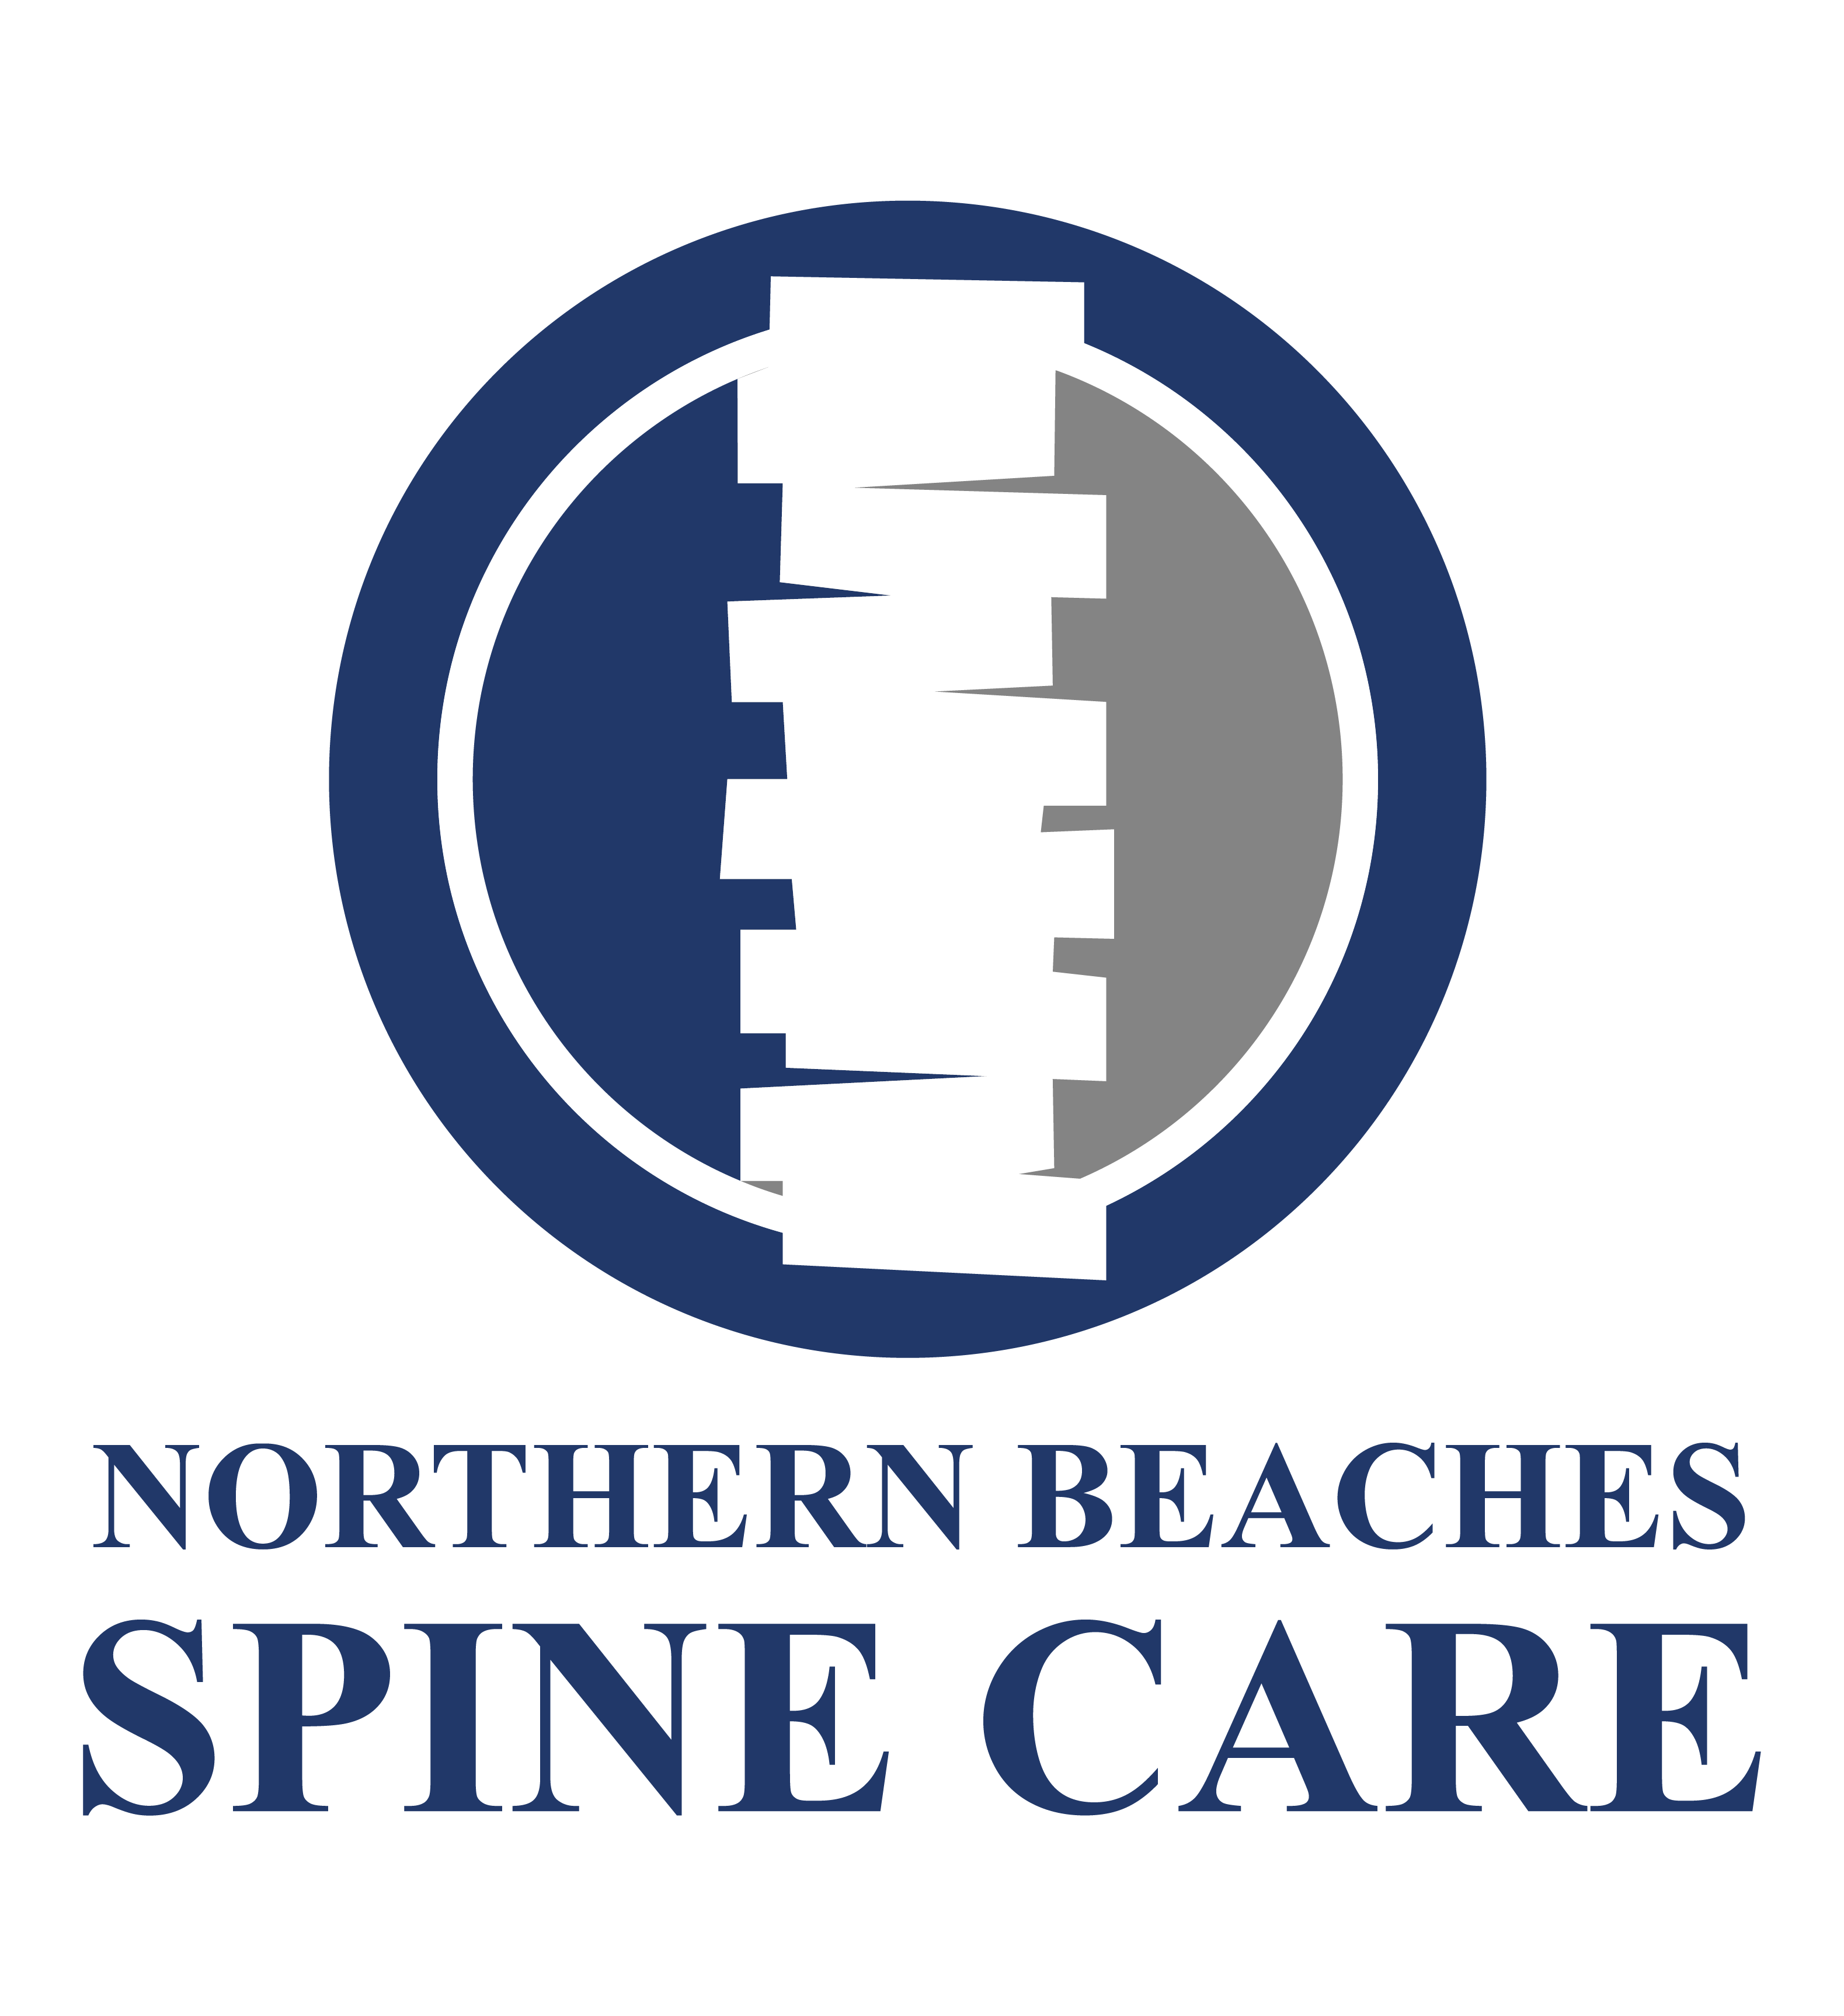 Northern Beaches Spine Care